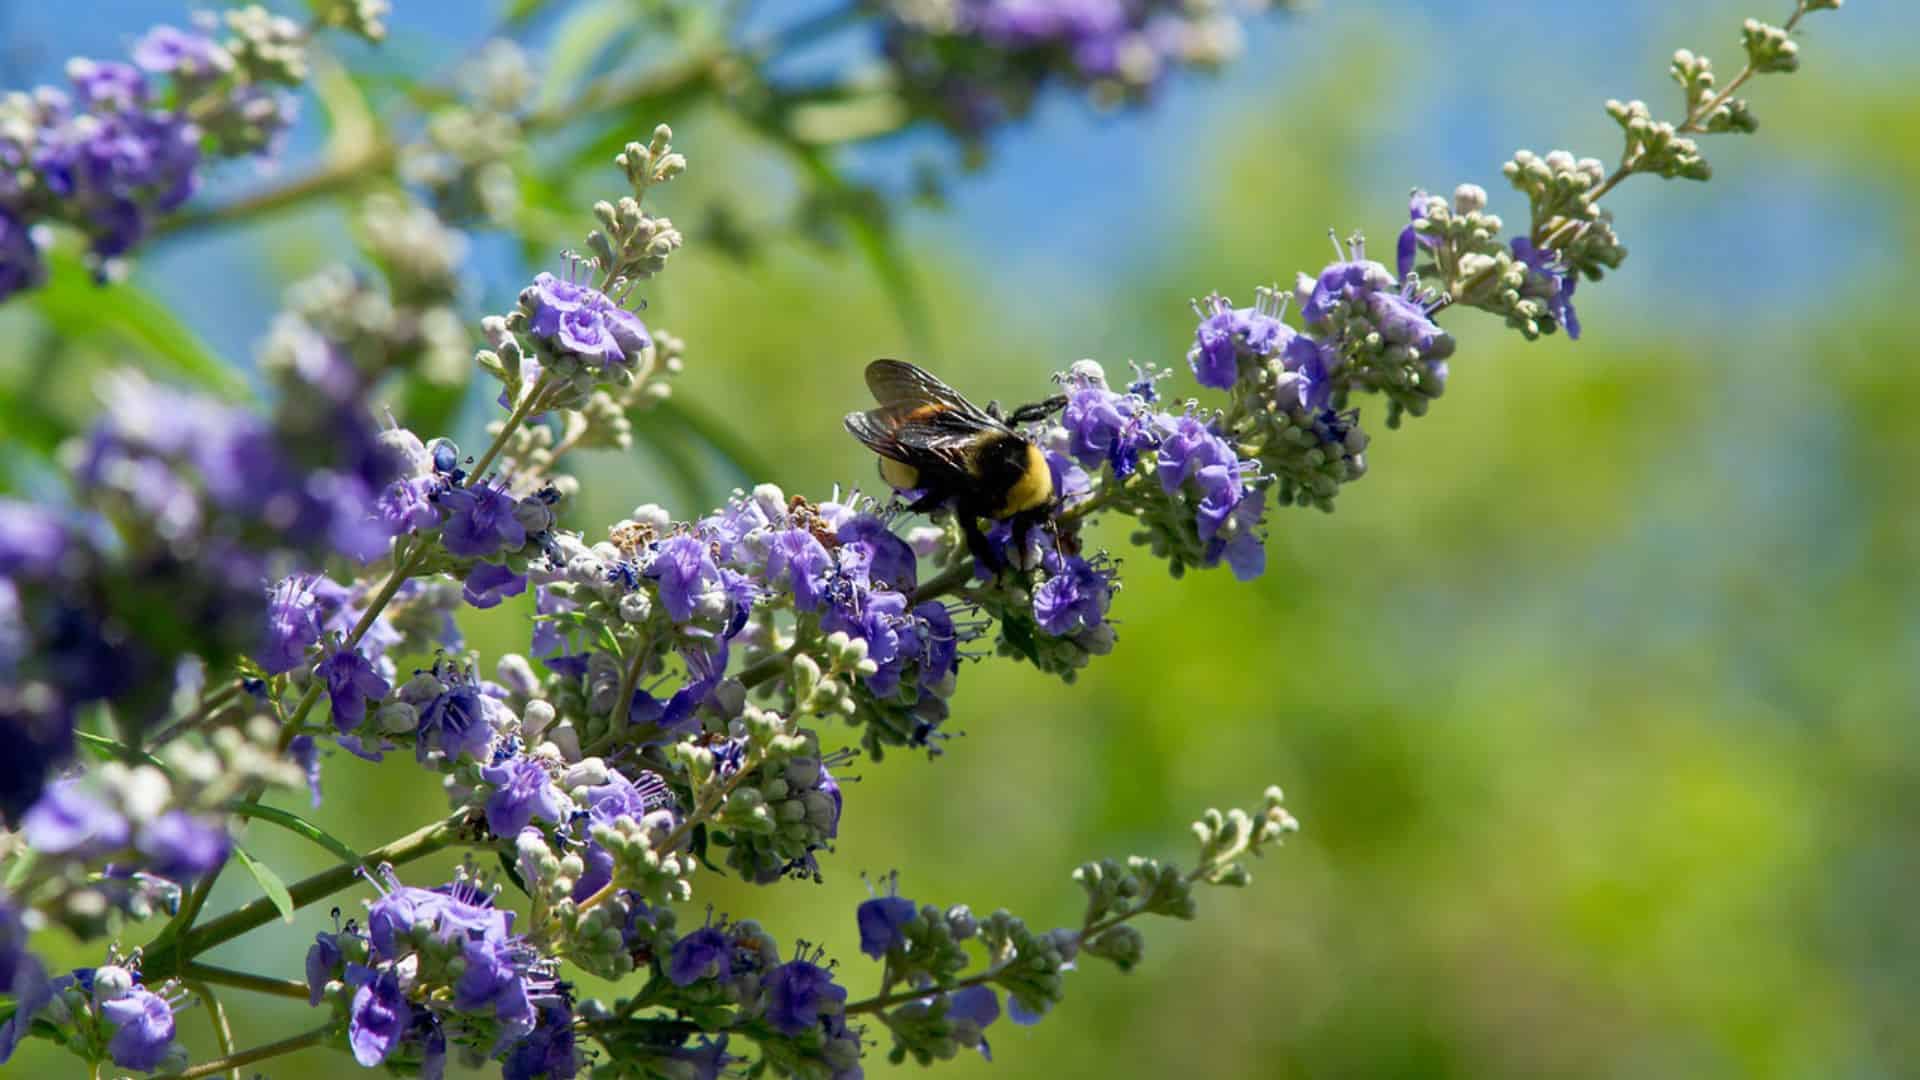 Close up view of large bumblebee on purple flowers